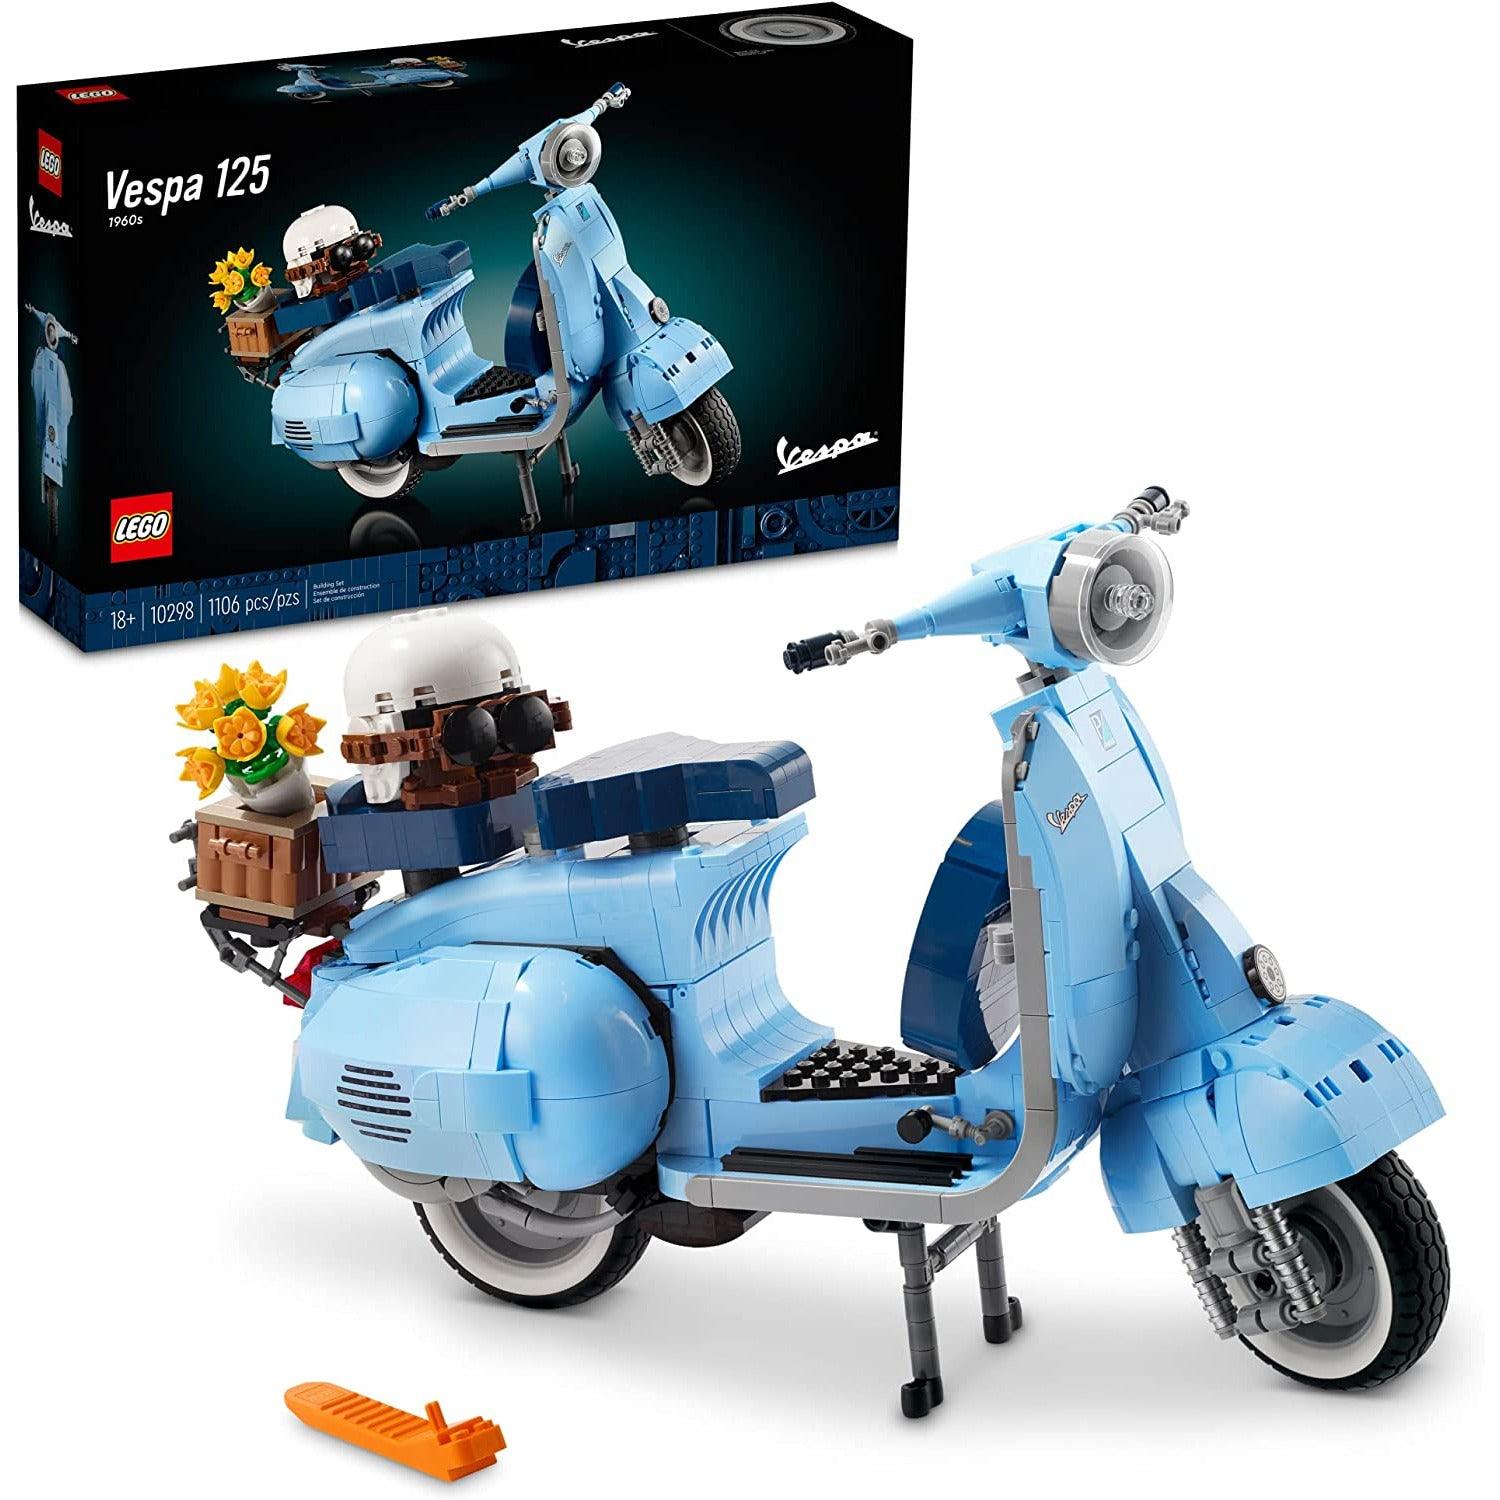 LEGO Icons Vespa 125 10298 Building Set for Adults (1107 Pieces) - BumbleToys - 8+ Years, Adults, Boys, Icons, LEGO, OXE, Pre-Order, Vespa